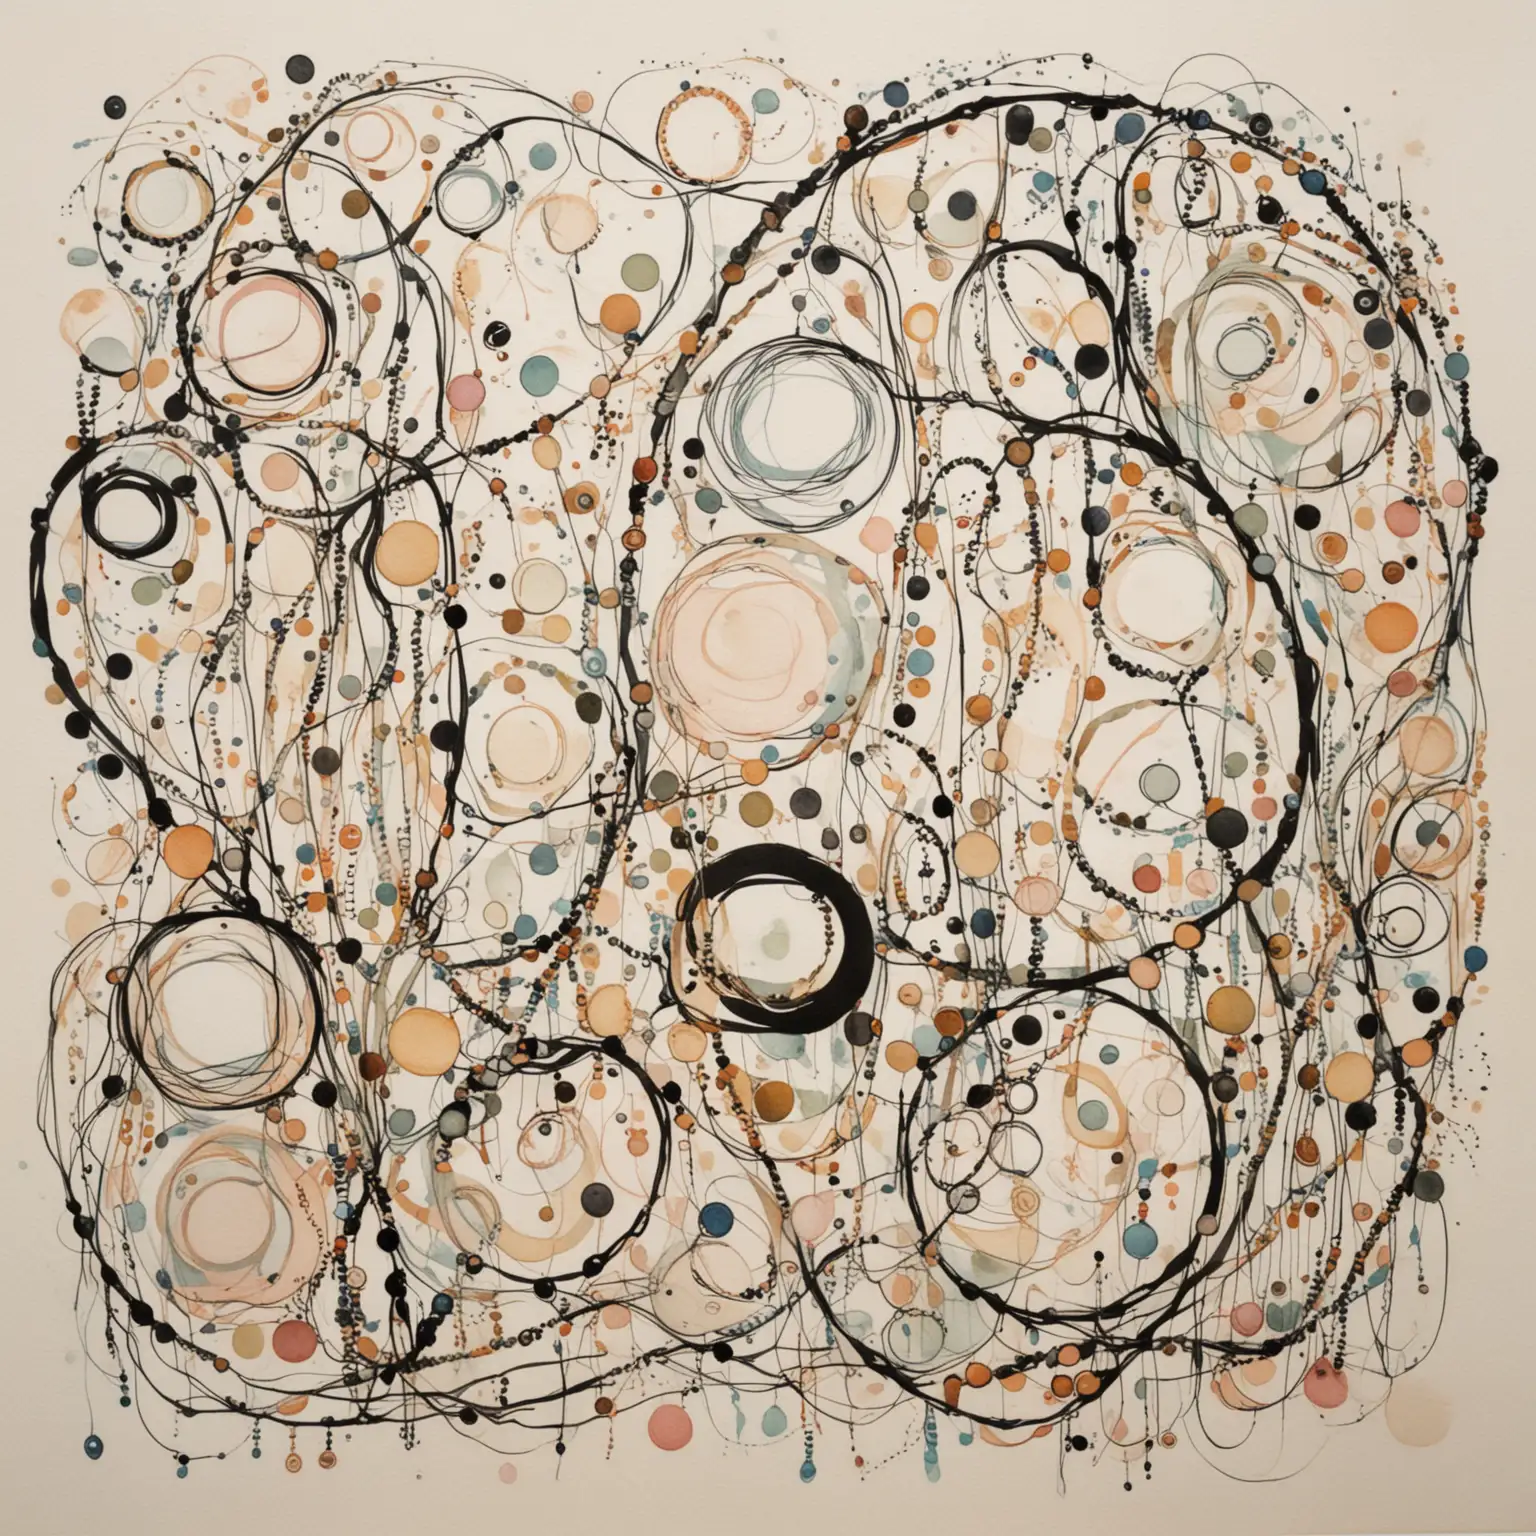 Abstract Watercolor Painting with Irregular Circles Vines and Beads on Ivory Background